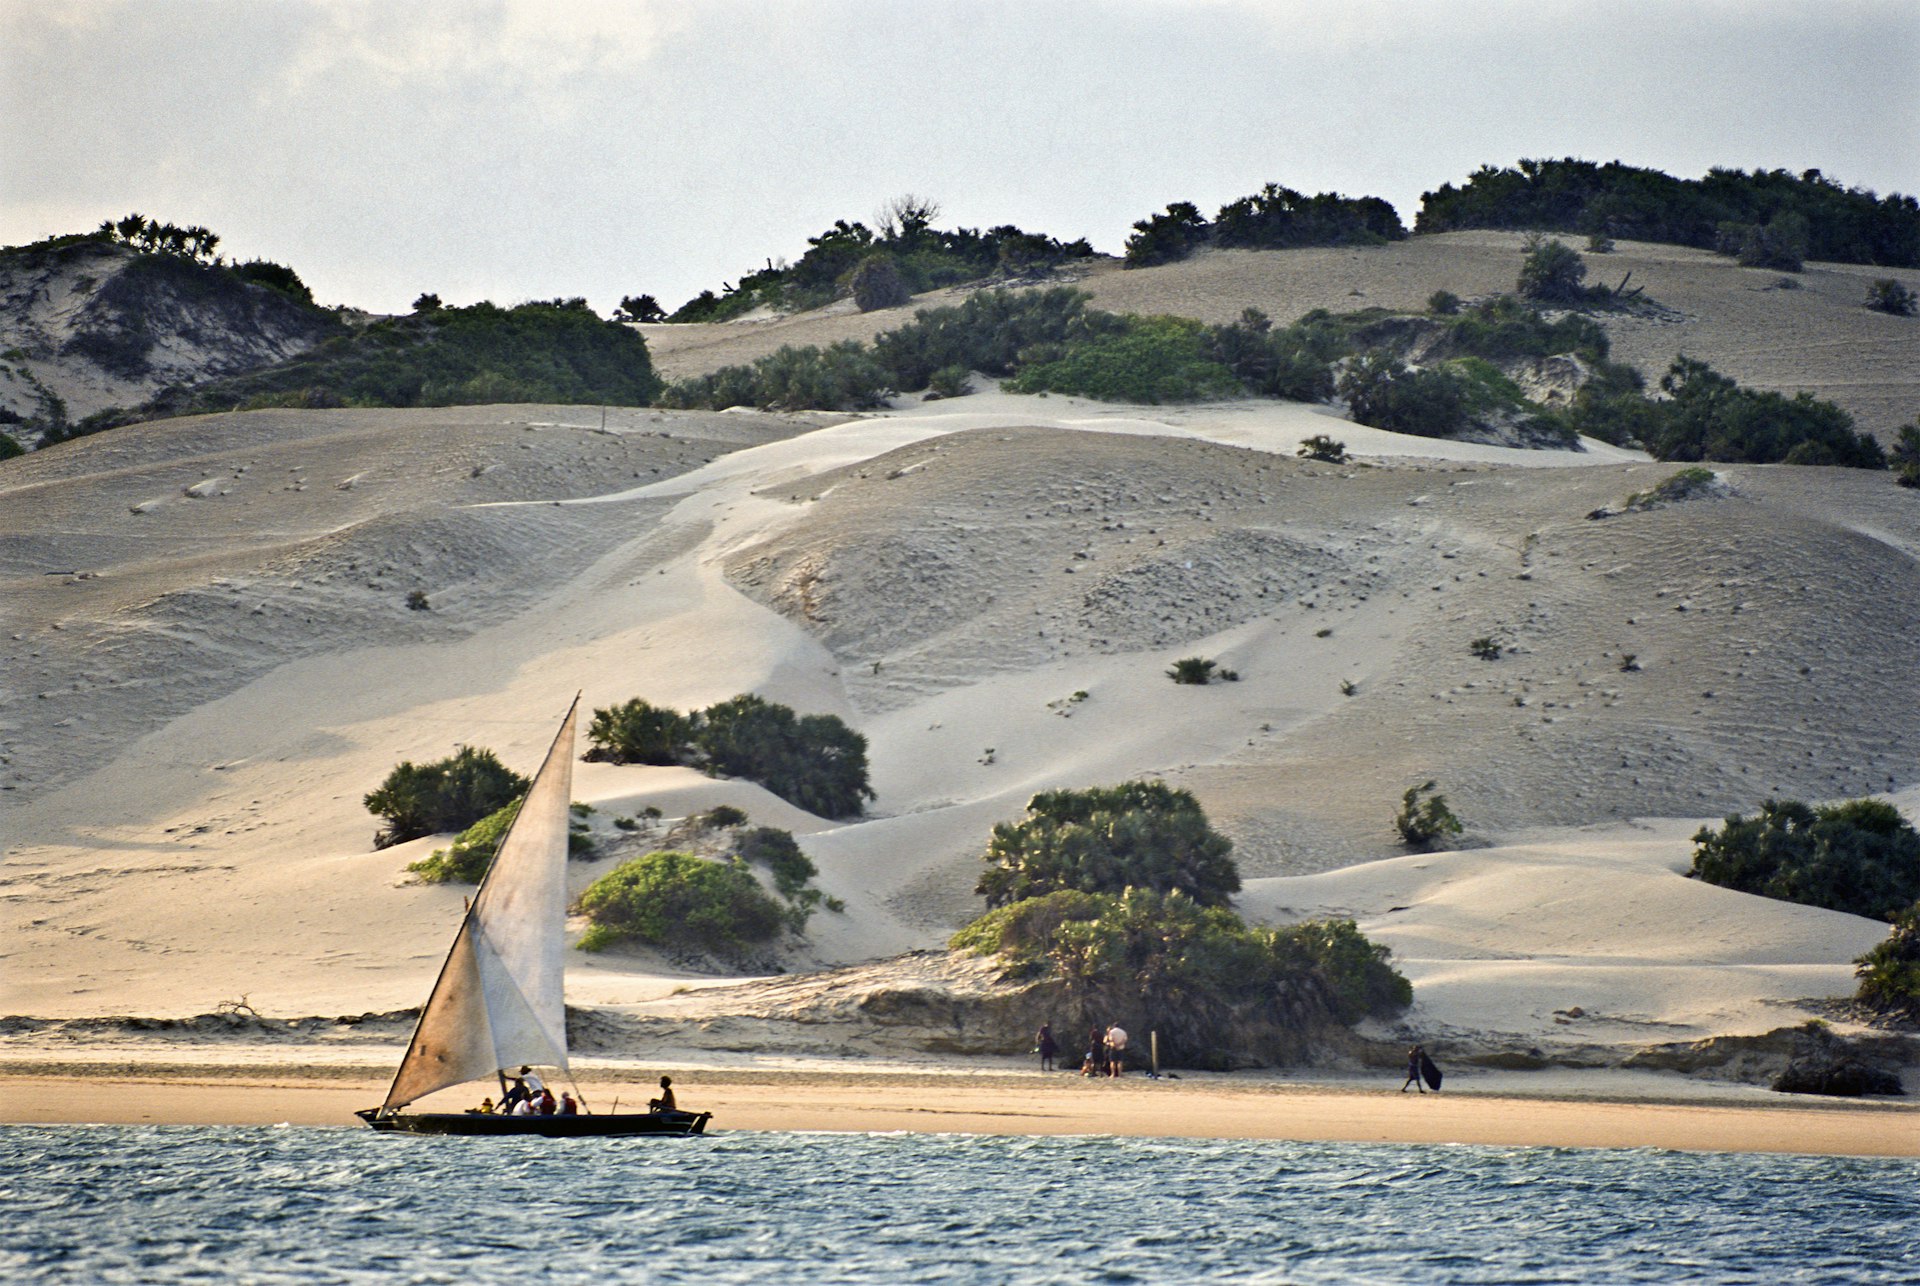 A traditional sailing boat passes vast sand dunes